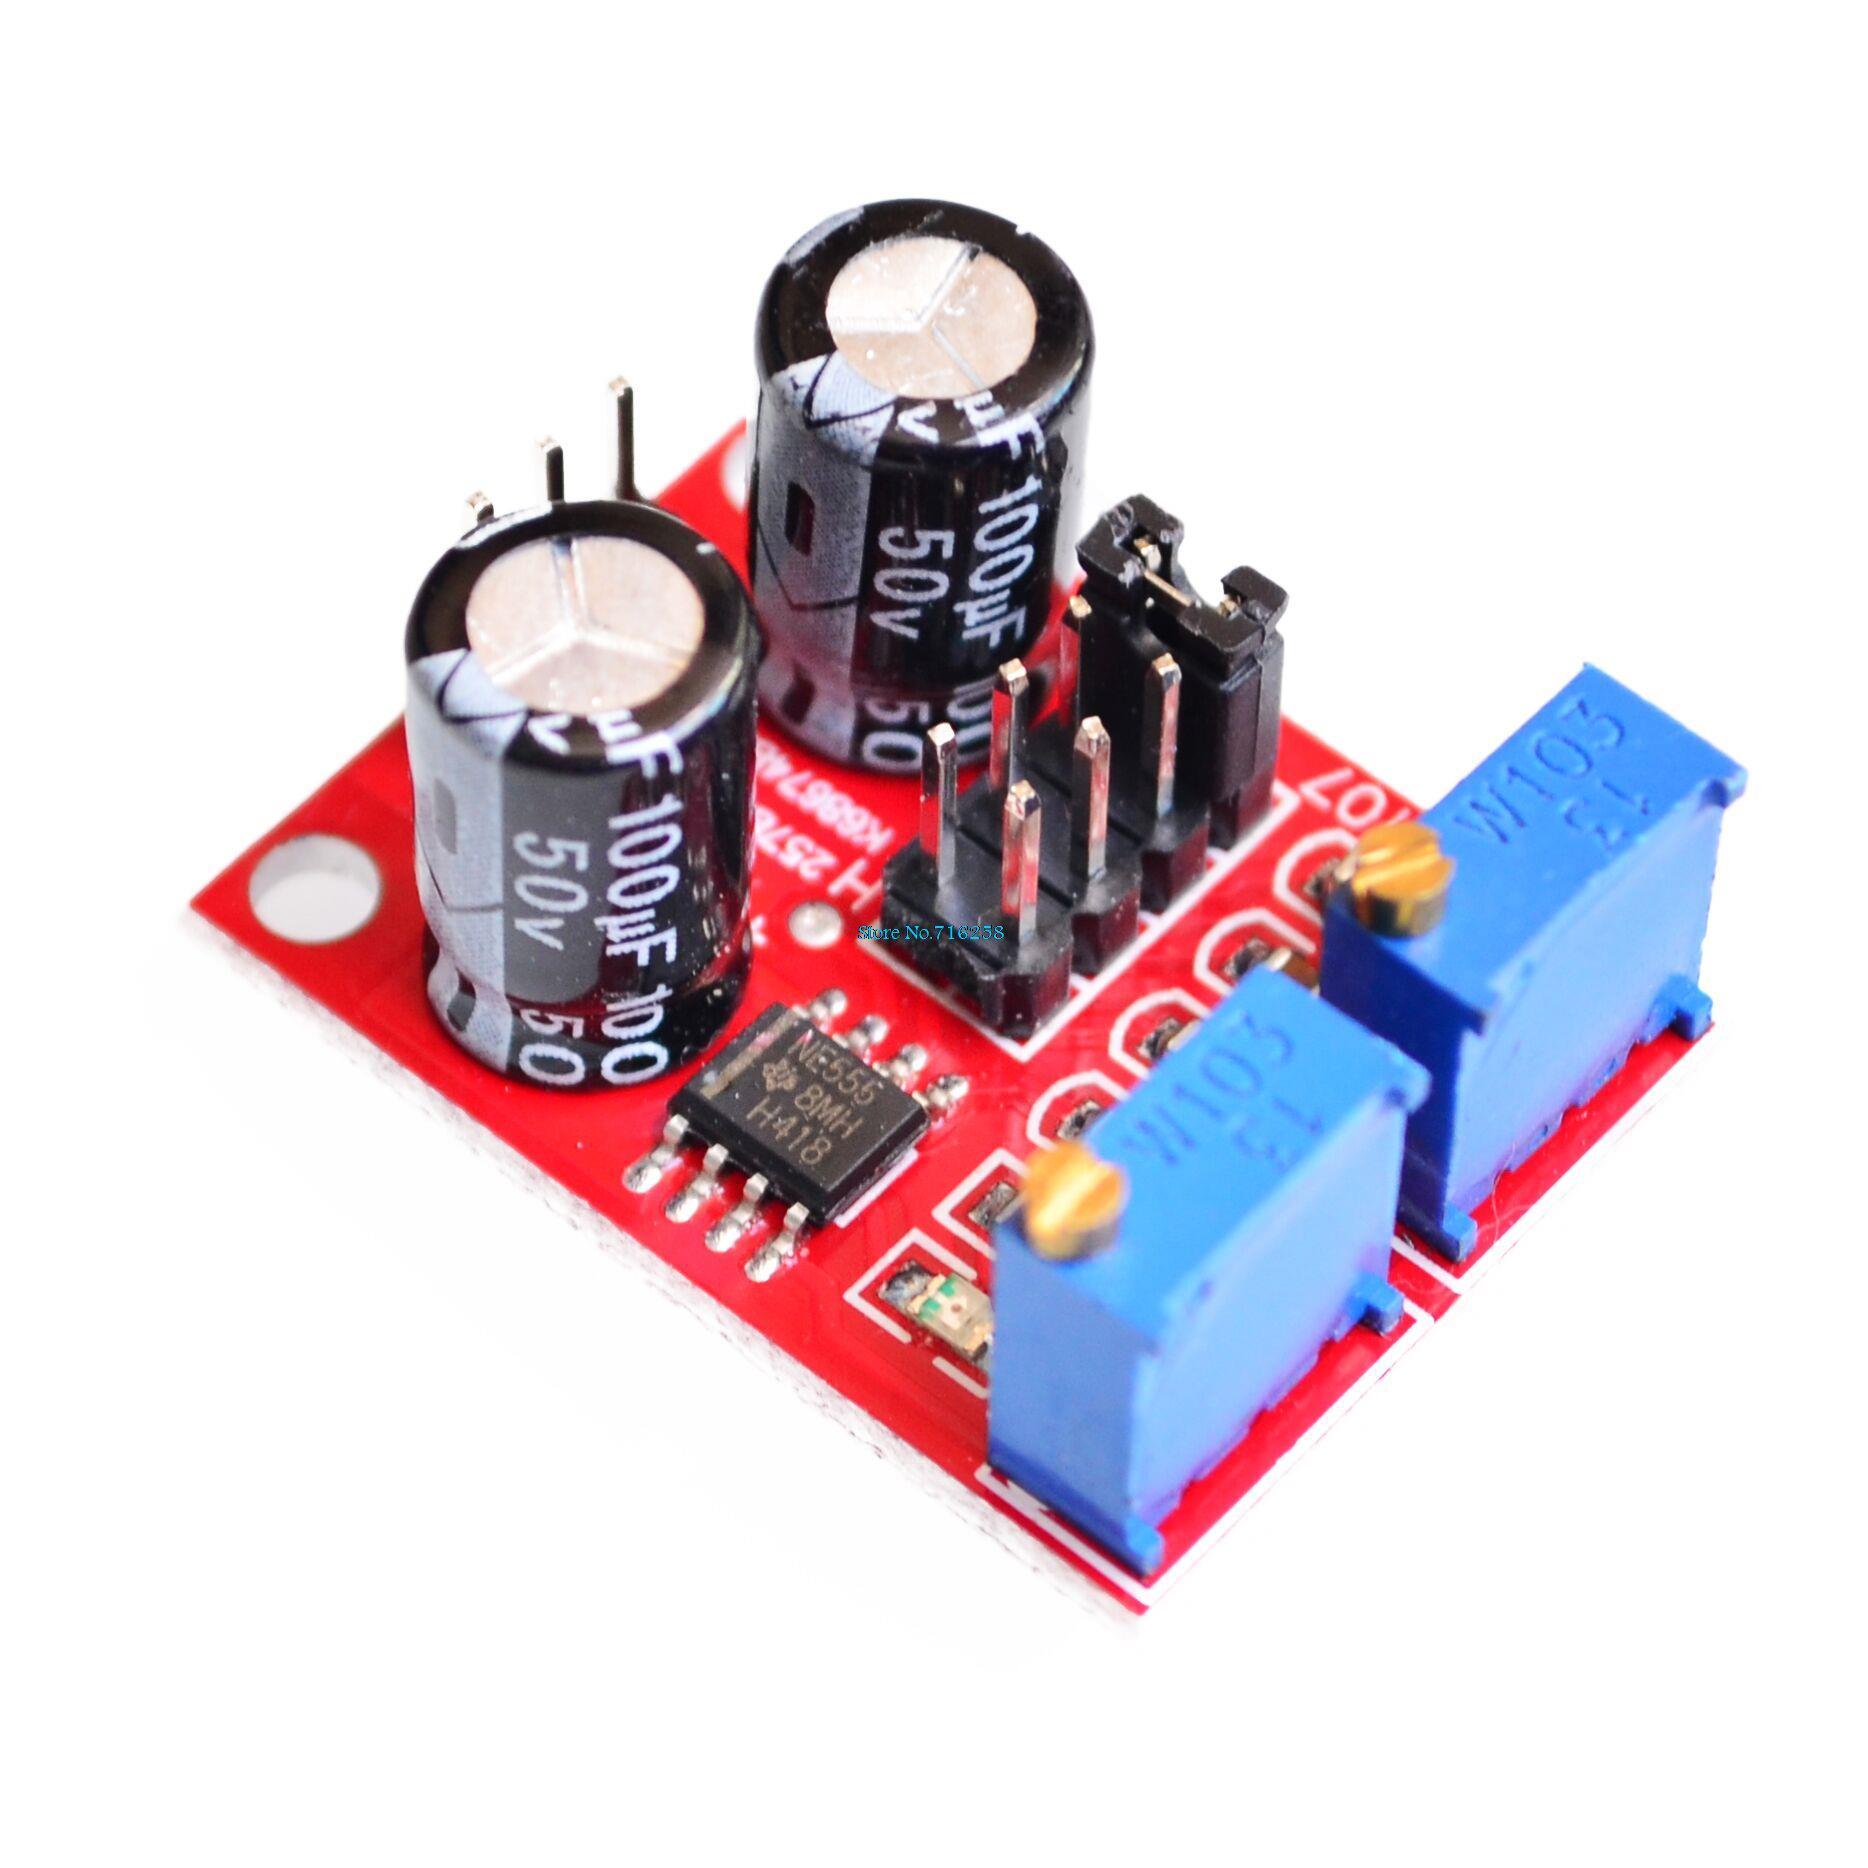 5pcs-lot-NE555-pulse-frequency-duty-cycle-adjustable-module-square-rectangular-wave-signal-generator-stepping-motor-driver